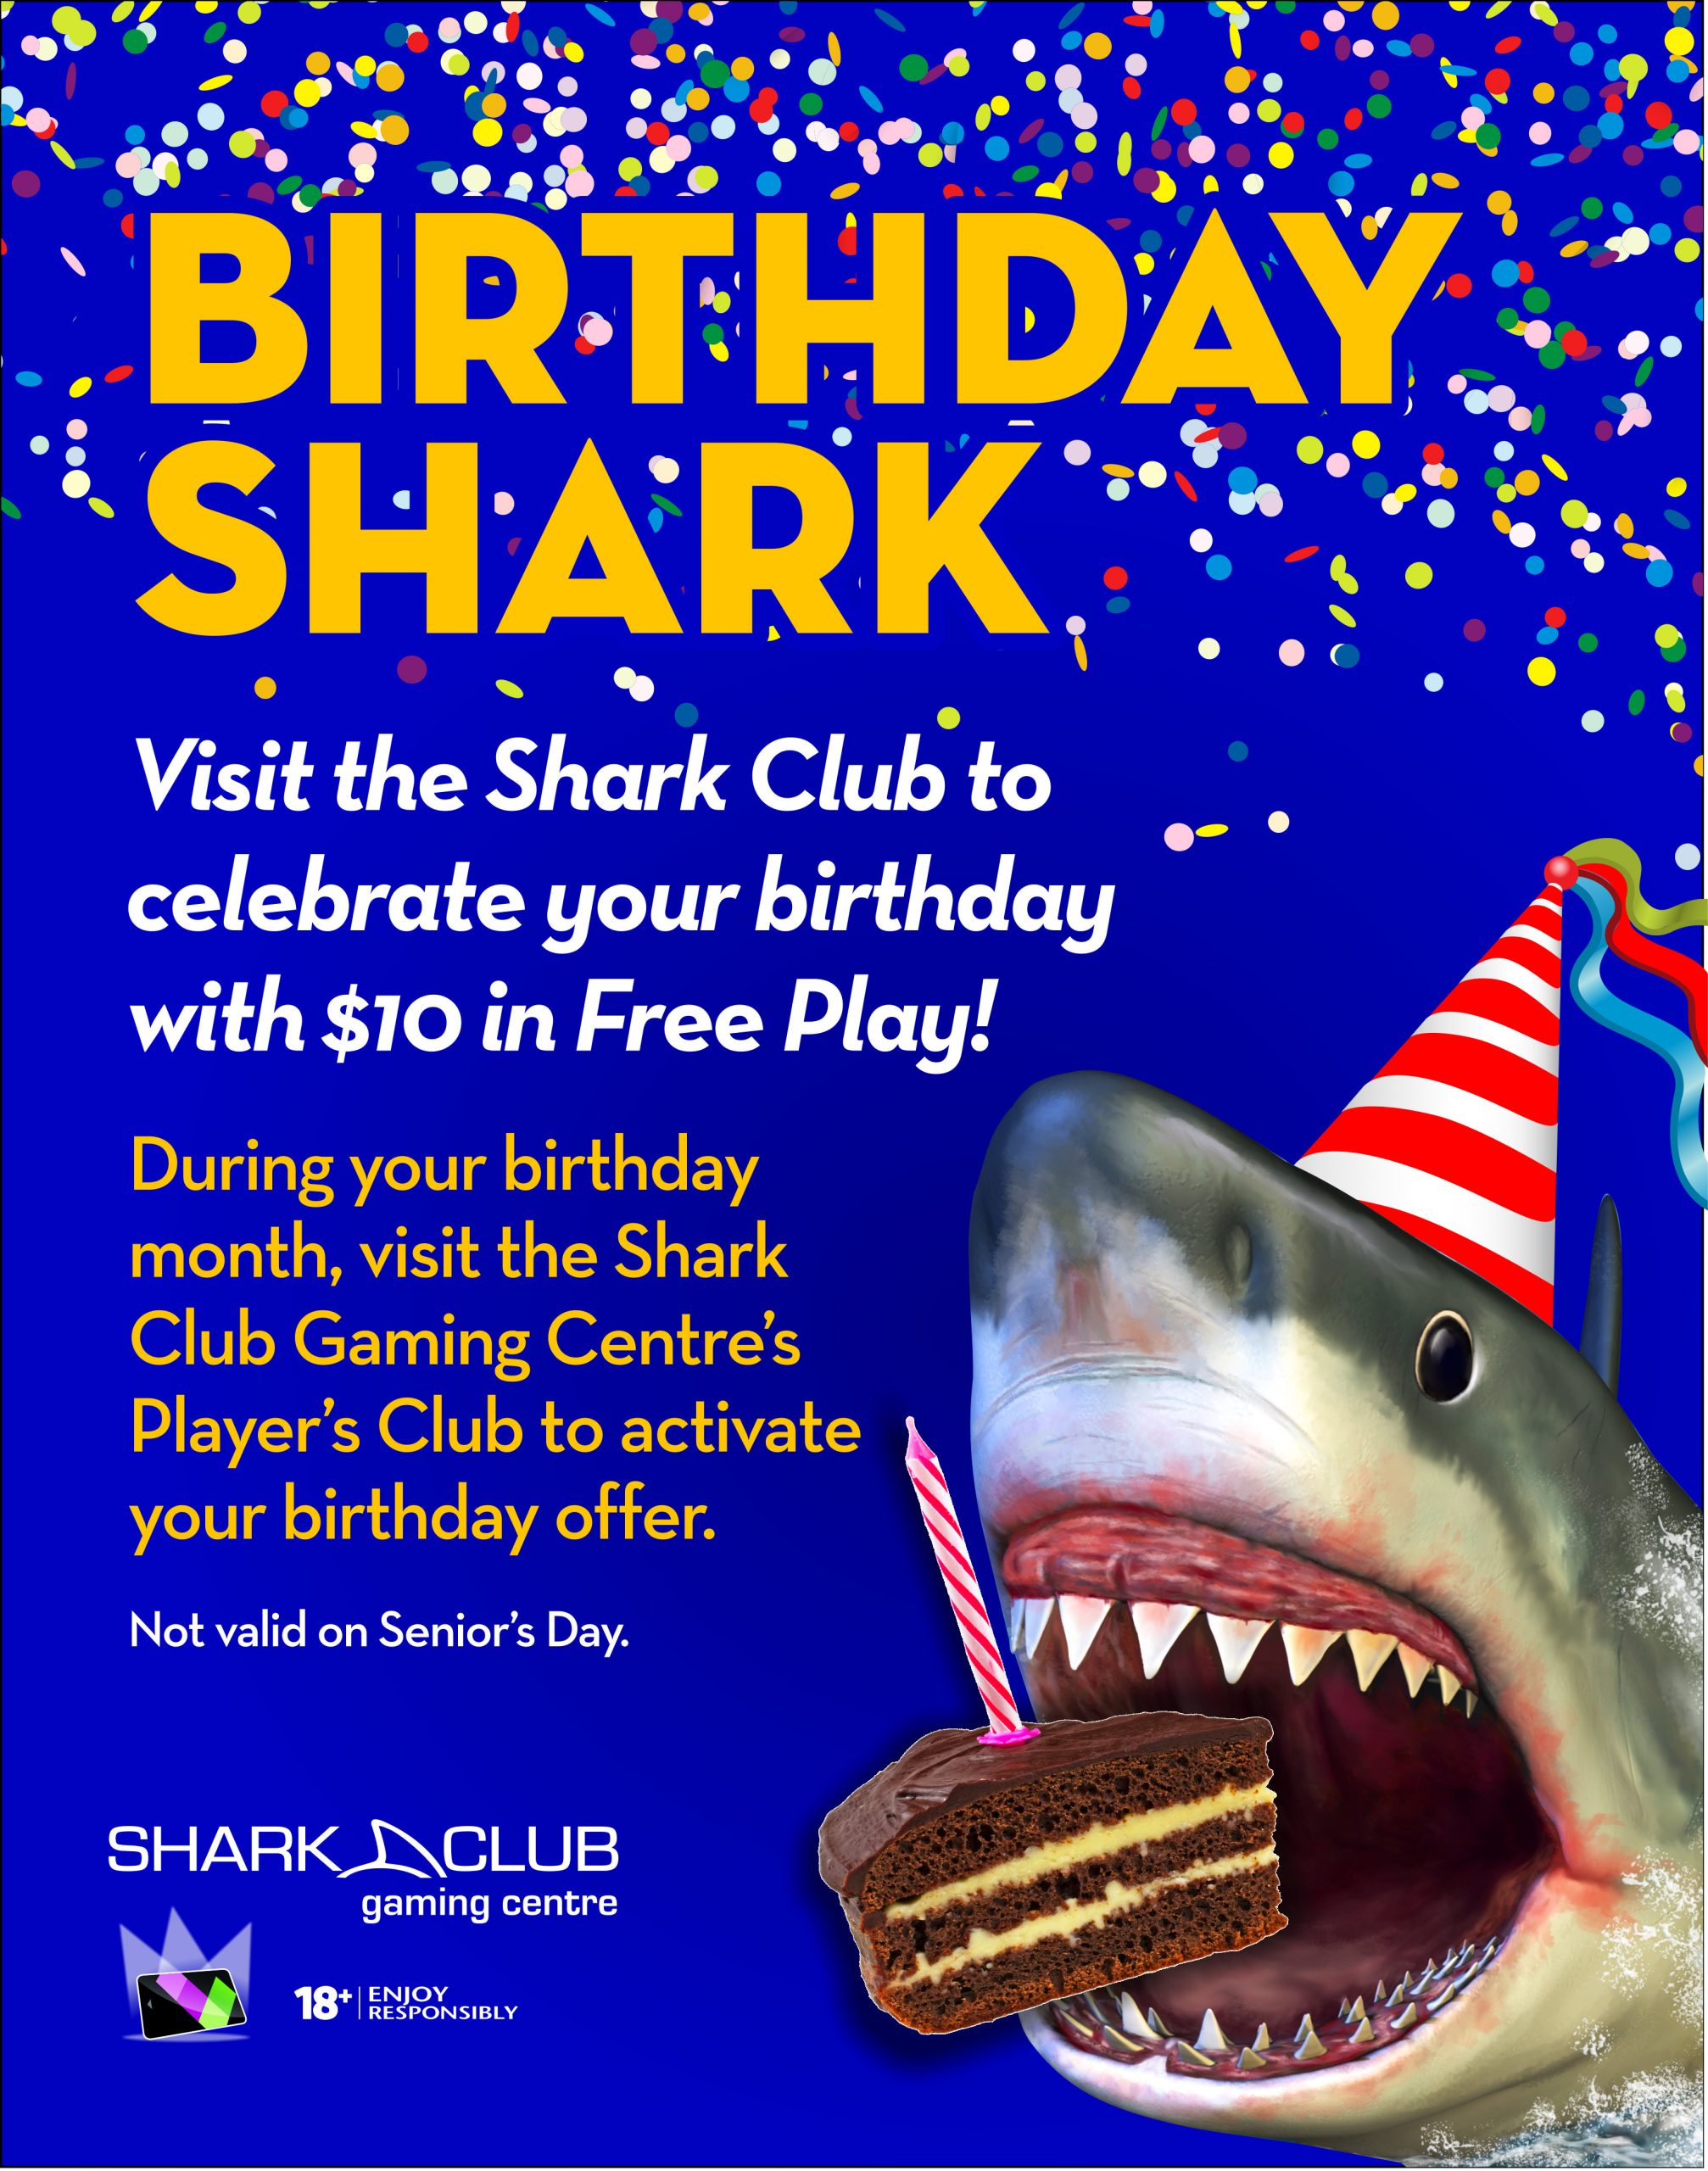 Birthday Shark - Visit the Shark Club to celebrate your birthday with $10 in Free Play!